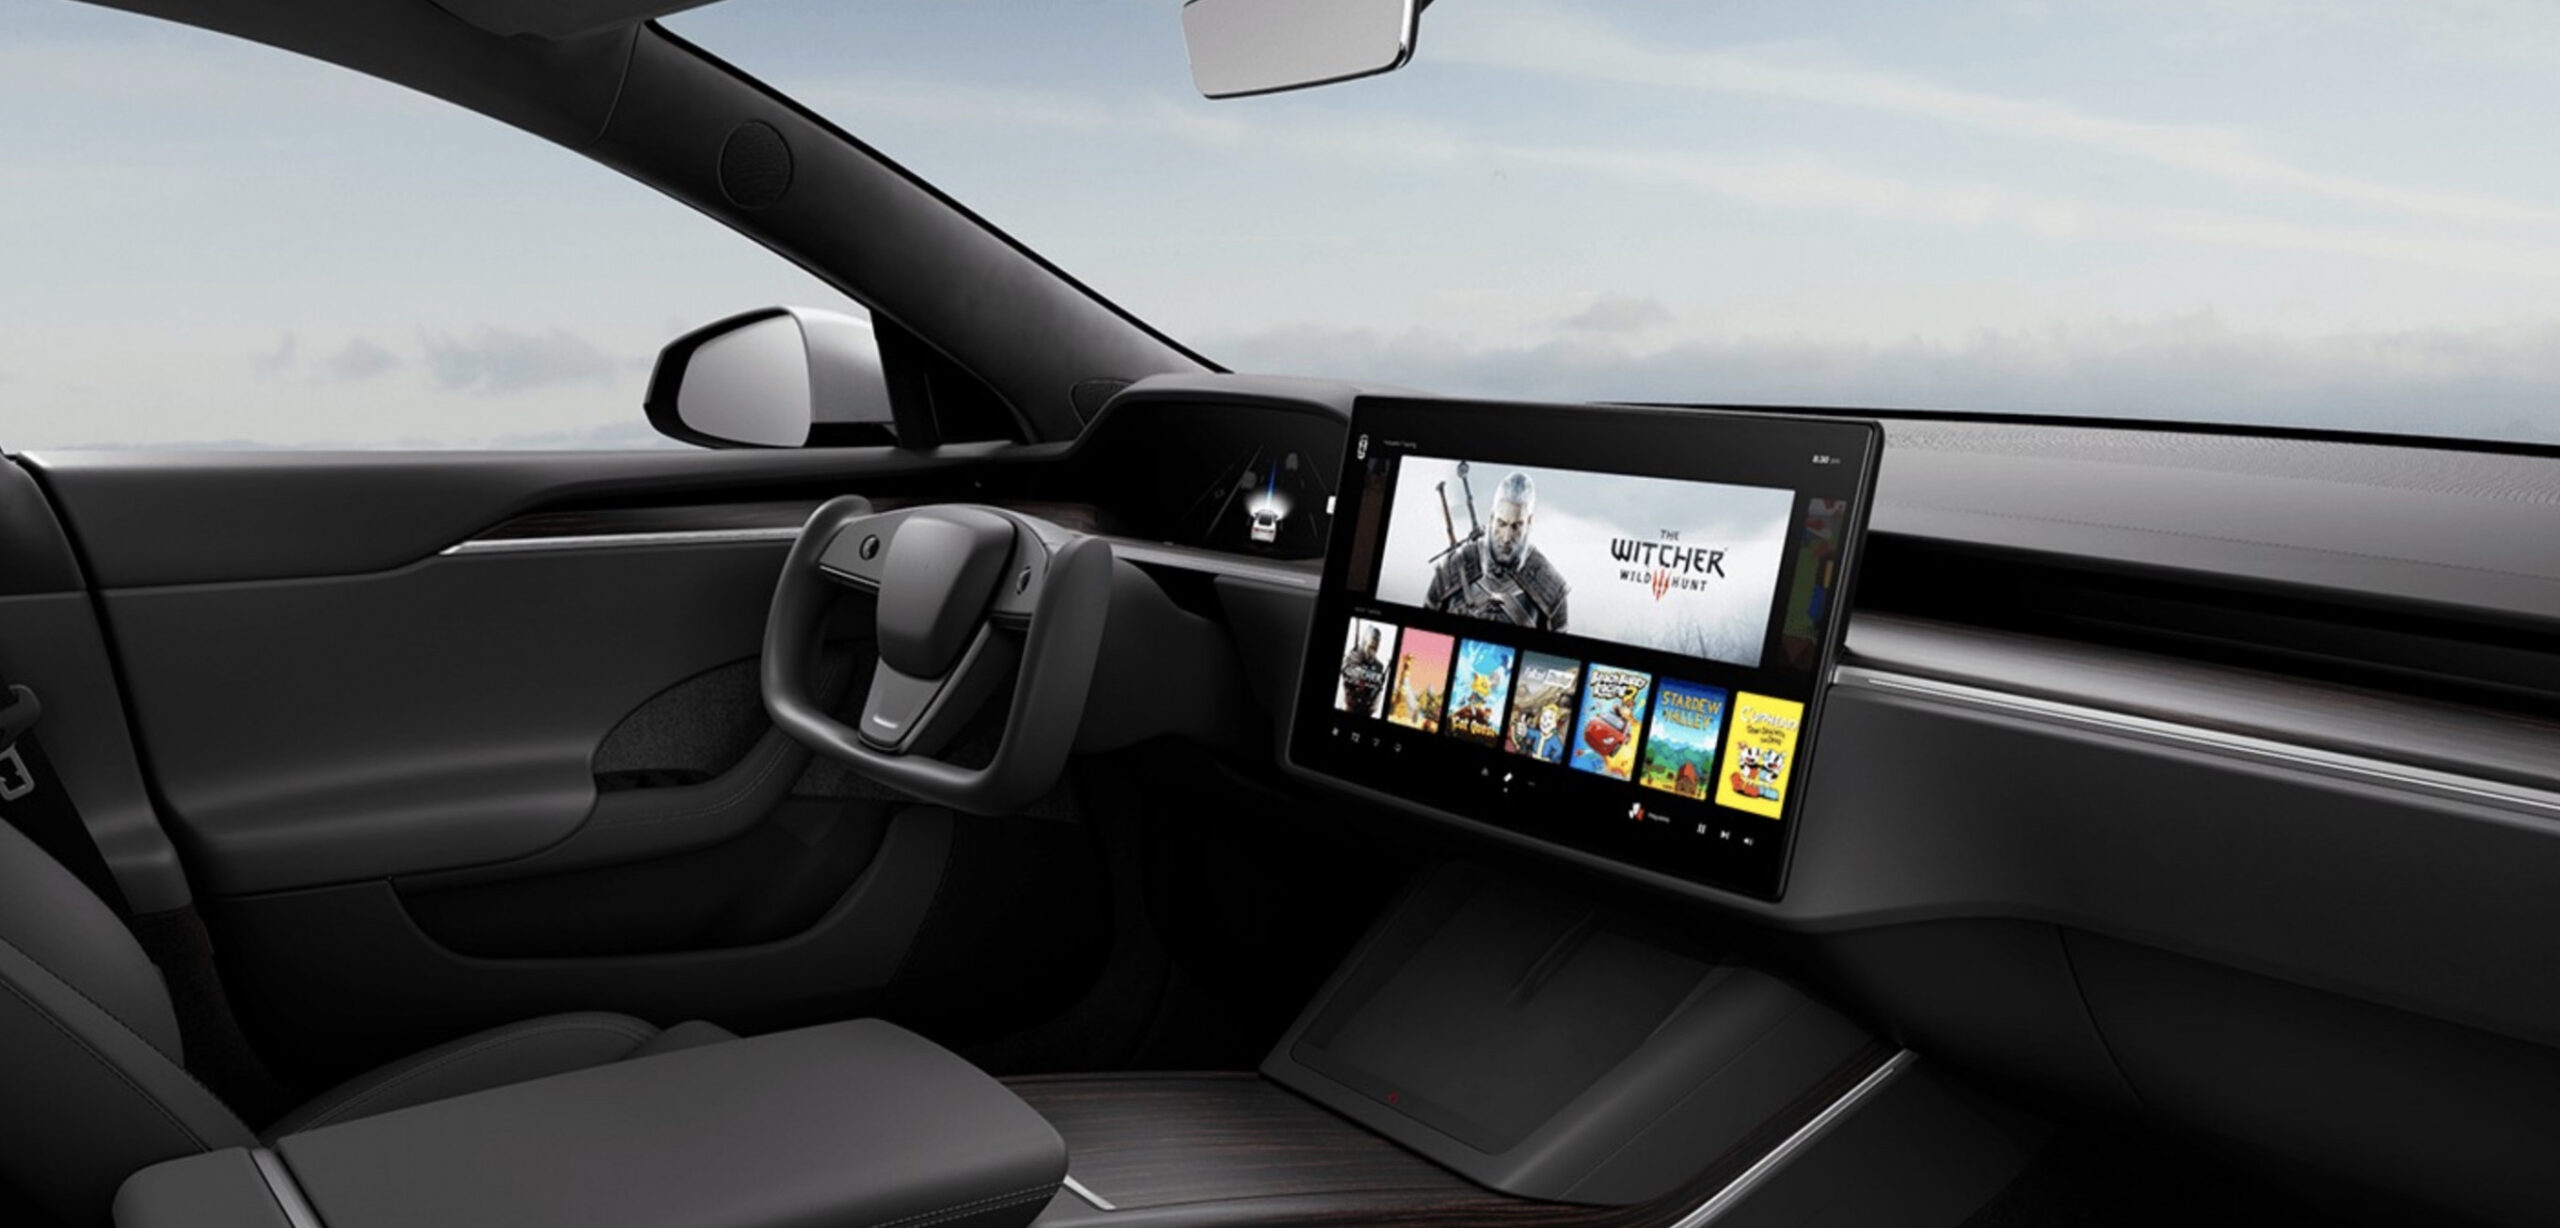 Redesign and Concept tesla model s refresh interior